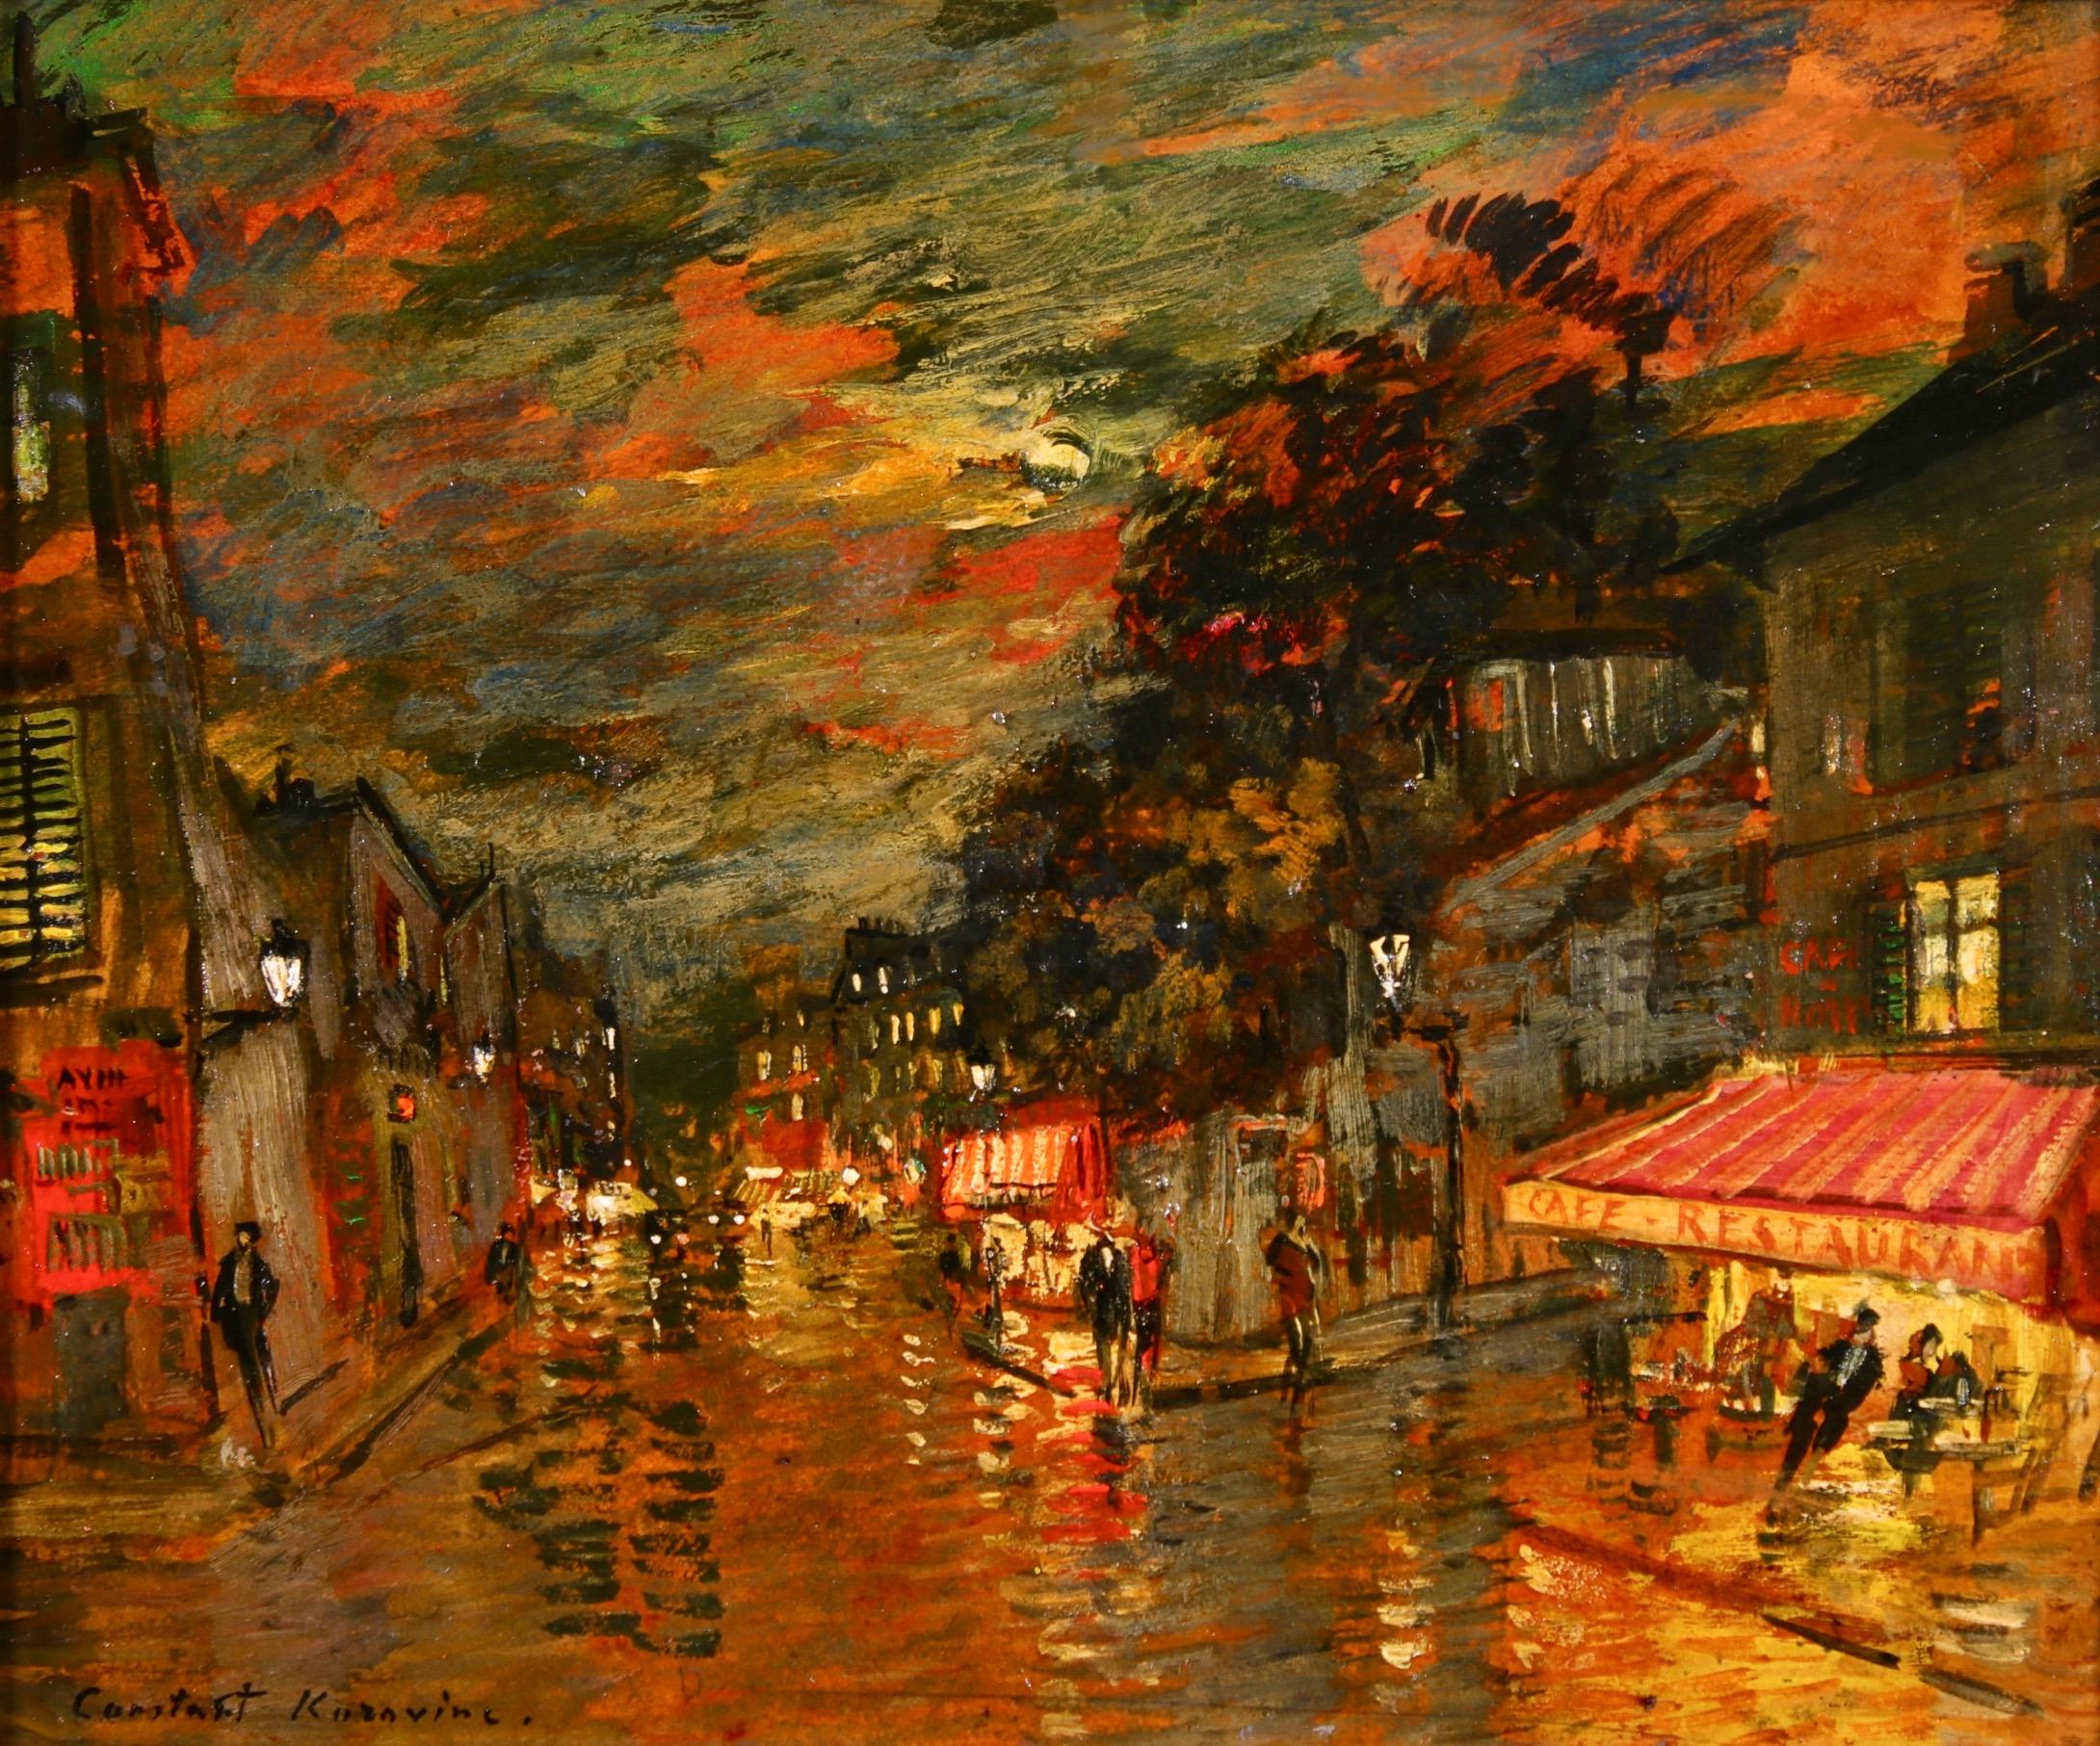 A Night in Paris - Impressionist Oil, Figures in Cityscape by Konstantin Korovin - Painting by Konstantin Alekseyevich Korovin